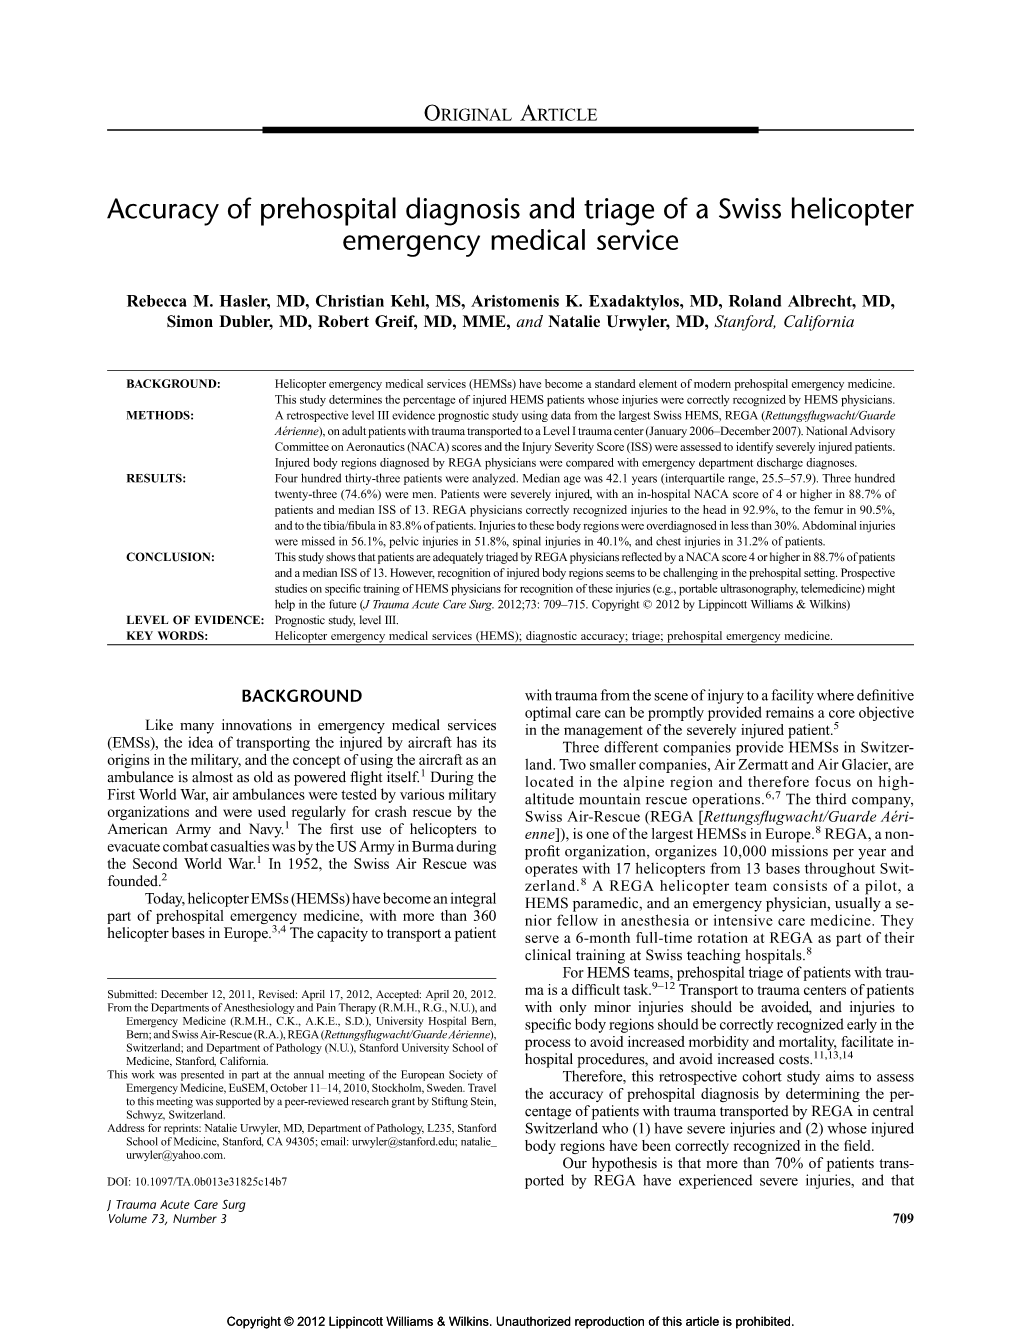 Accuracy of Prehospital Diagnosis and Triage of a Swiss Helicopter Emergency Medical Service